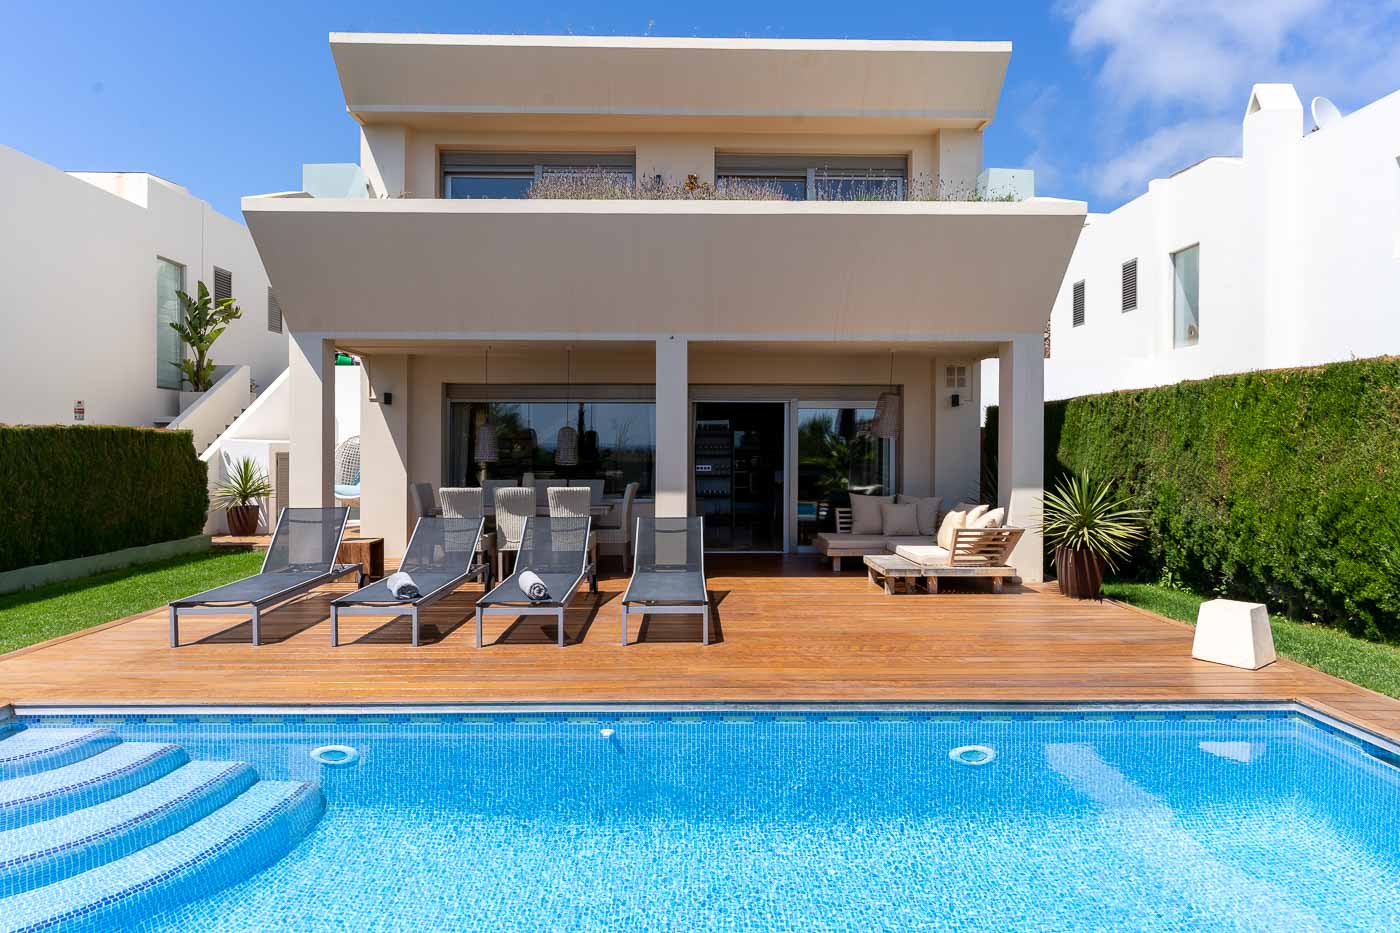 Modern white villa with expansive sliding doors opening onto a sun-drenched deck with stylish outdoor furniture, leading to a stunning pool with steps, all set against a backdrop of manicured hedges and clear blue skies.